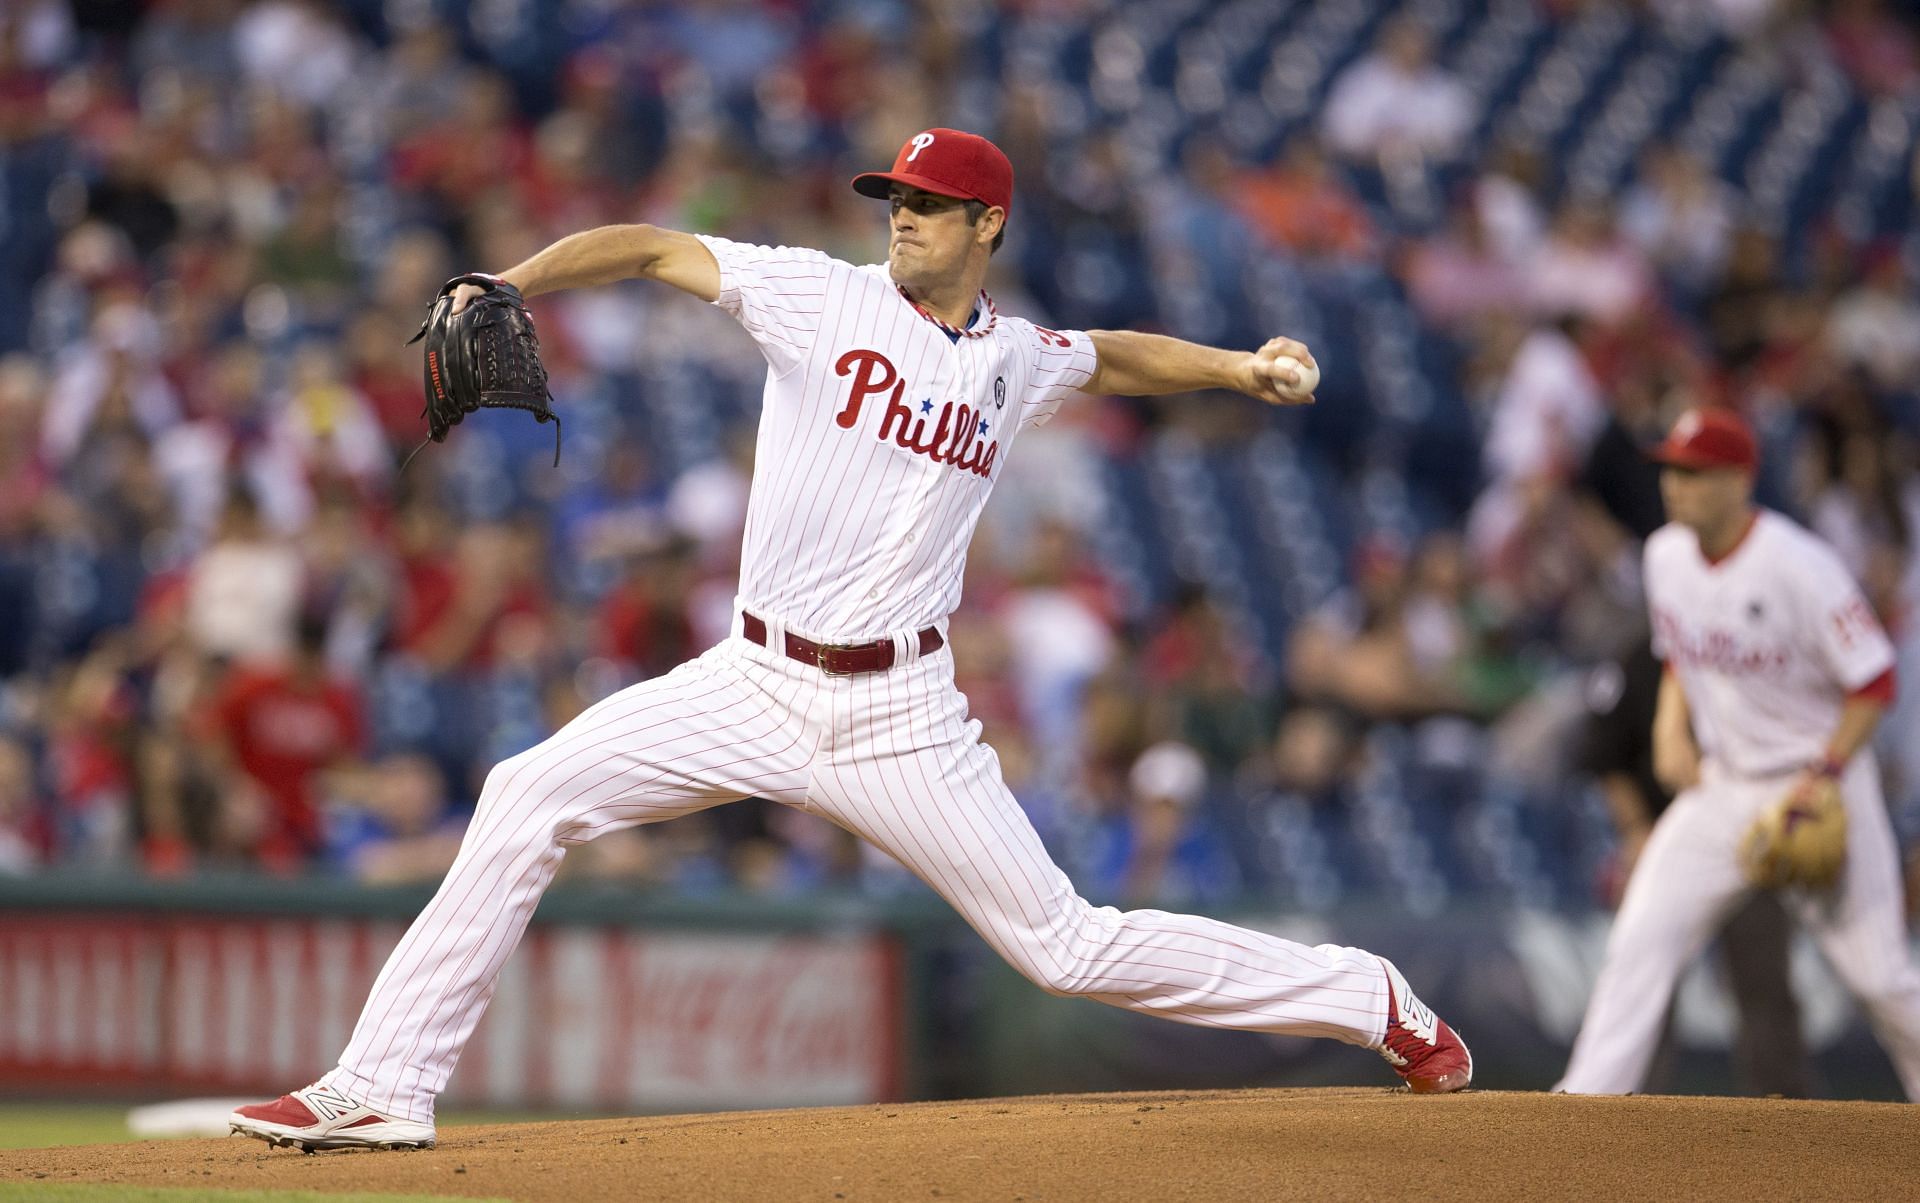 Pitcher Cole Hamels throws a pitch against the Miami Marlins on September 12, 2014 at Citizens Bank Park